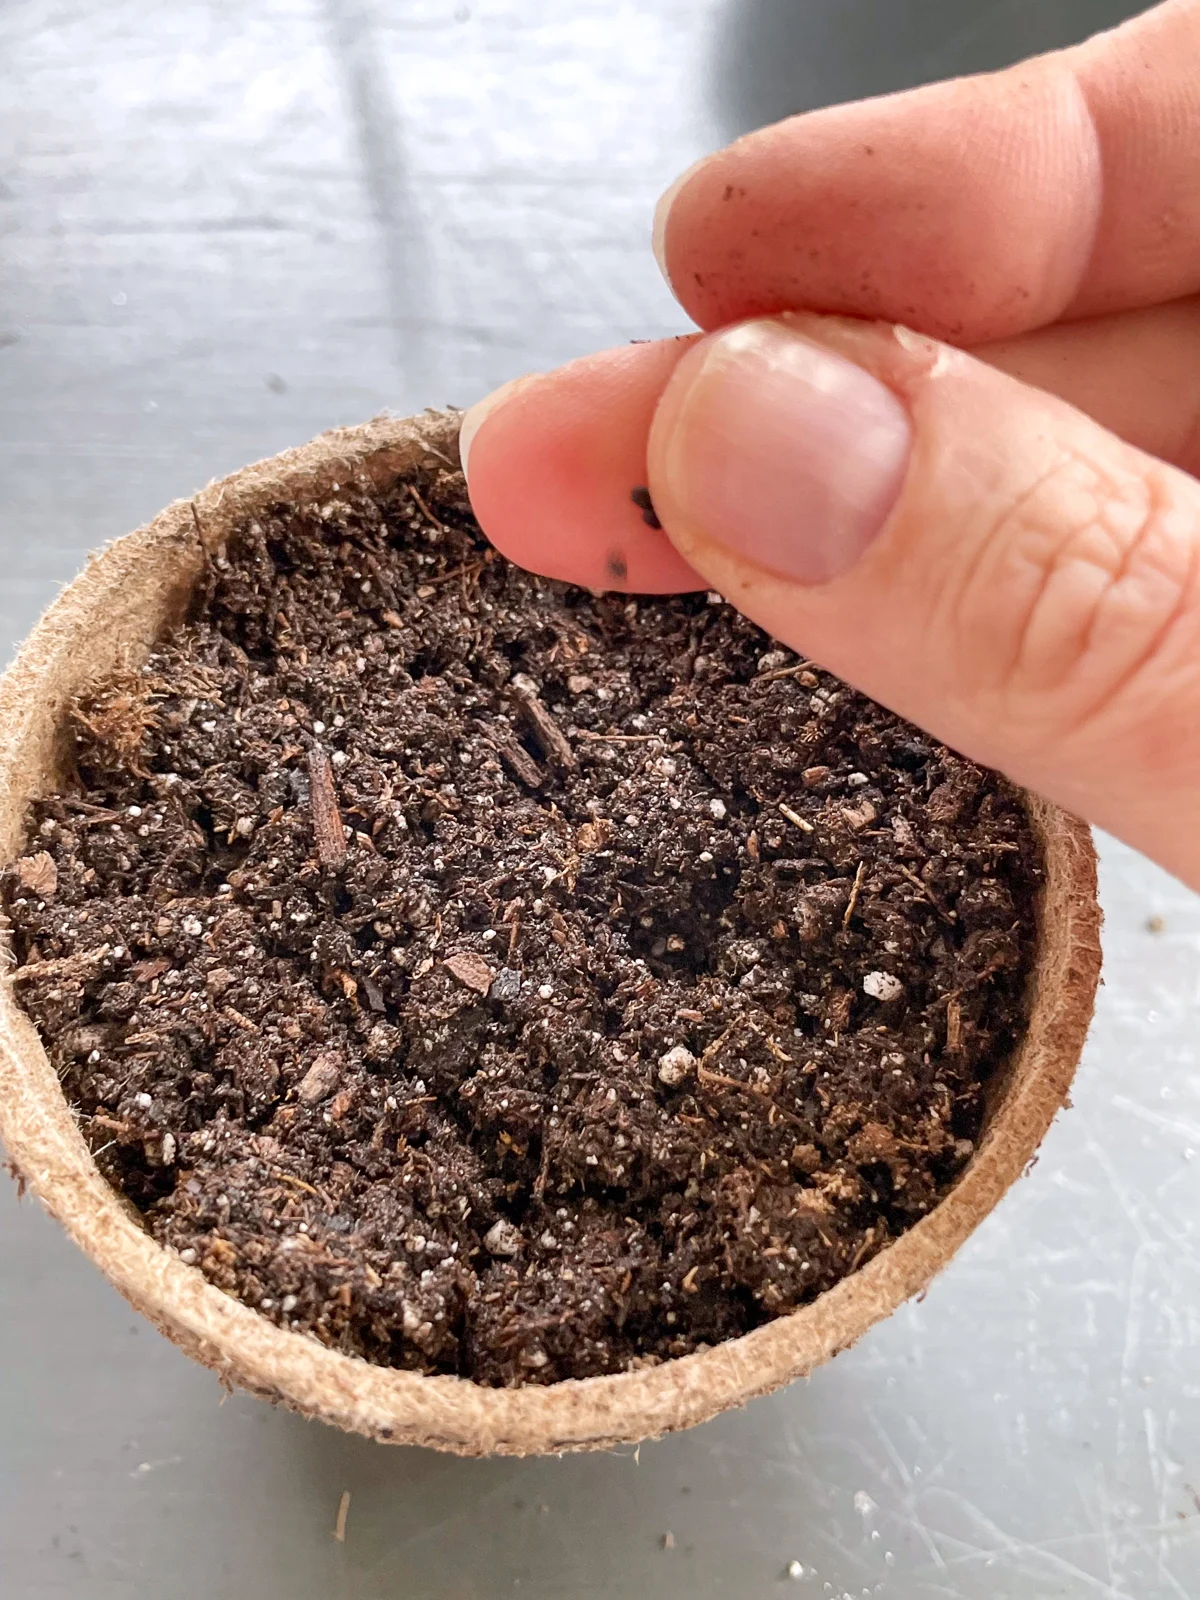 planting basil seeds in a small peat pot